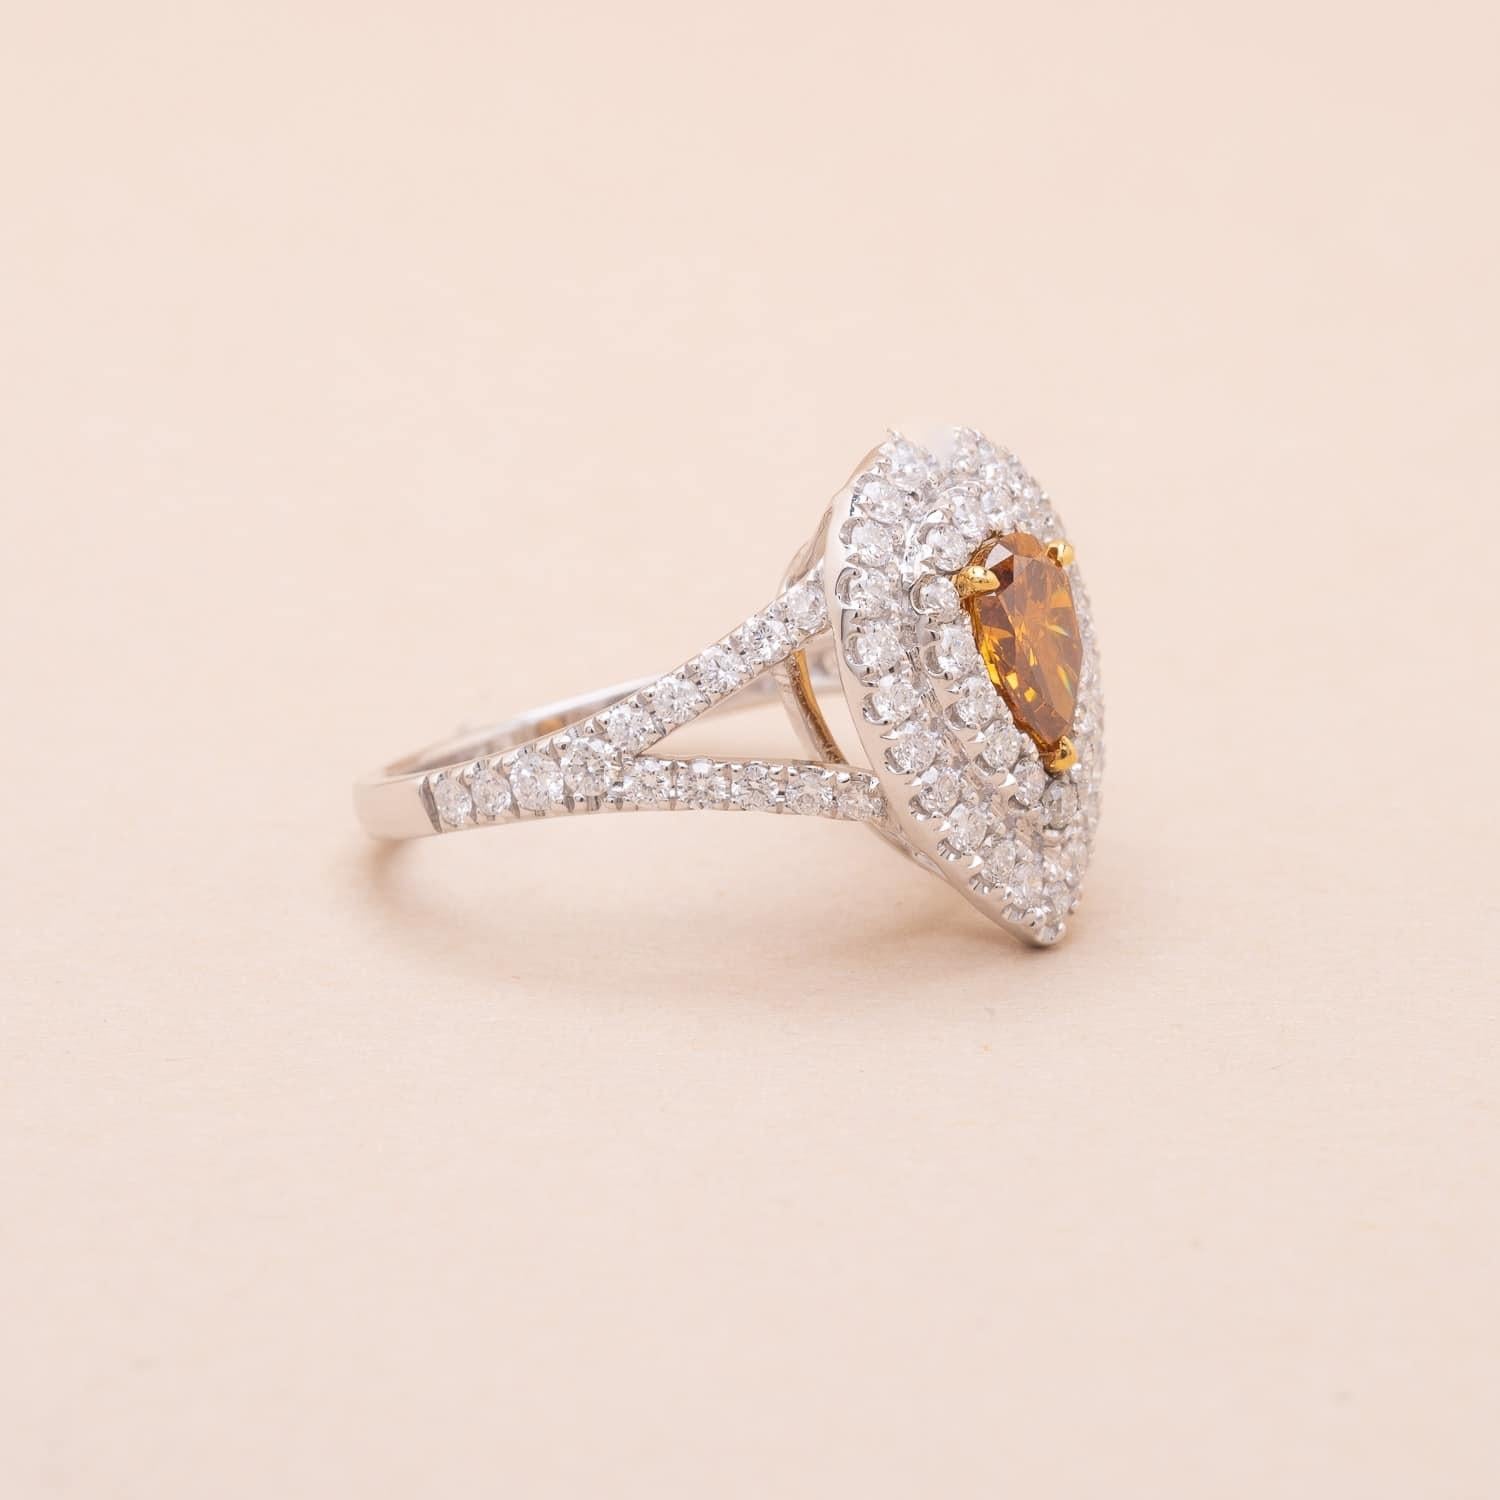 18K white gold 0.62 carat ?Natural Fancy Yellowish Orange pear-cut diamond and 1.25 carat brillant-cut diamonds drop-shaped ring 
Certified GIA report n°5181790757
Ring size (adjustable on demand) : 53 FR
Gross weight : 5.01g 

Original and yet